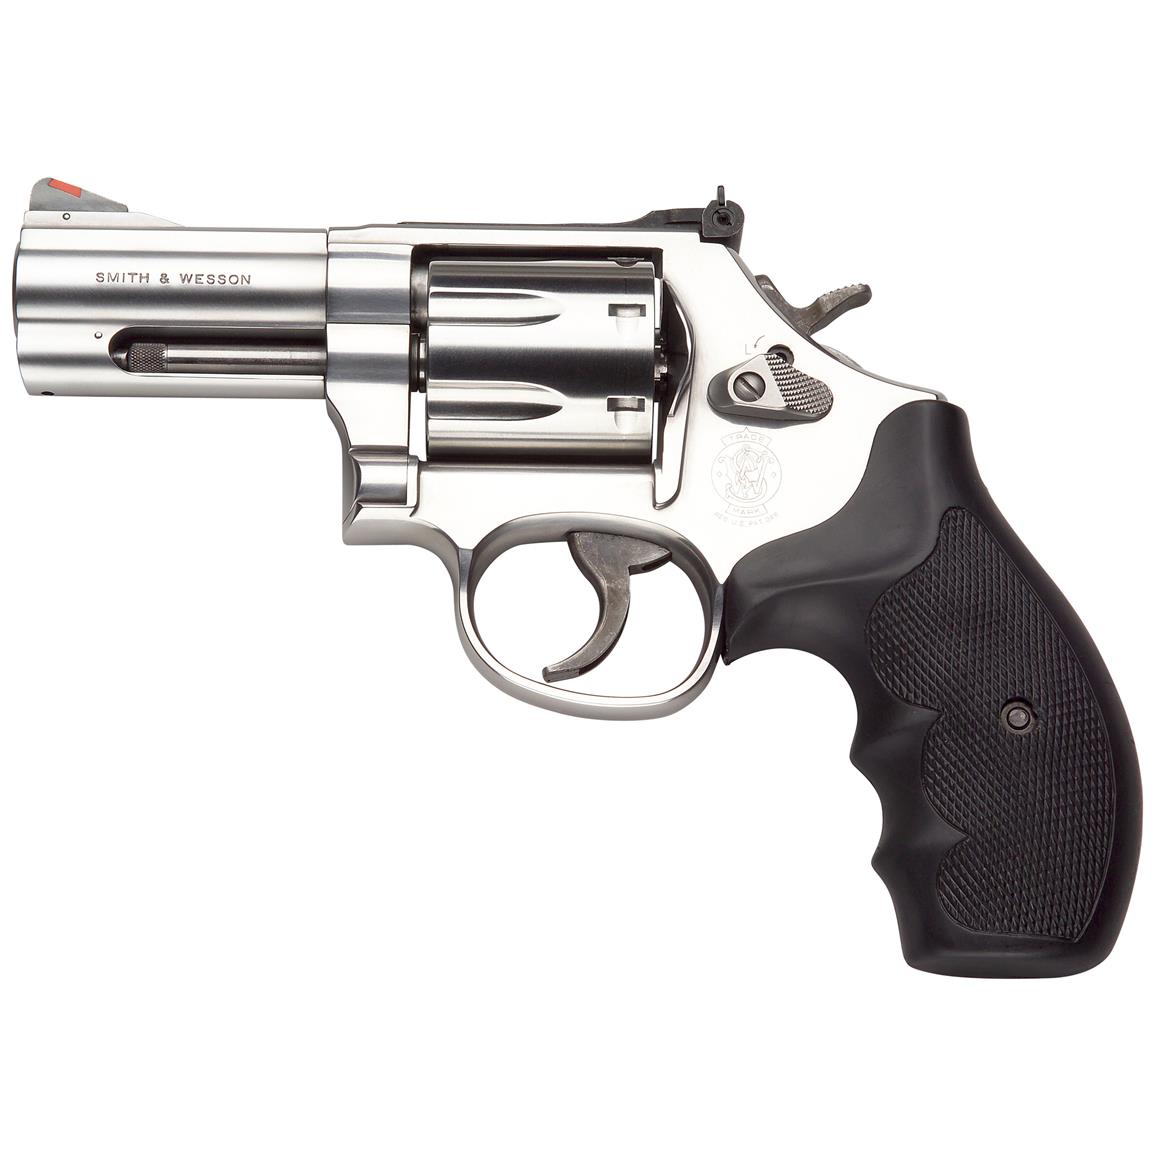 Smith And Wesson Model 686 Plus Distinguished Combat Revolver 357 Magnum Centerfire 164300